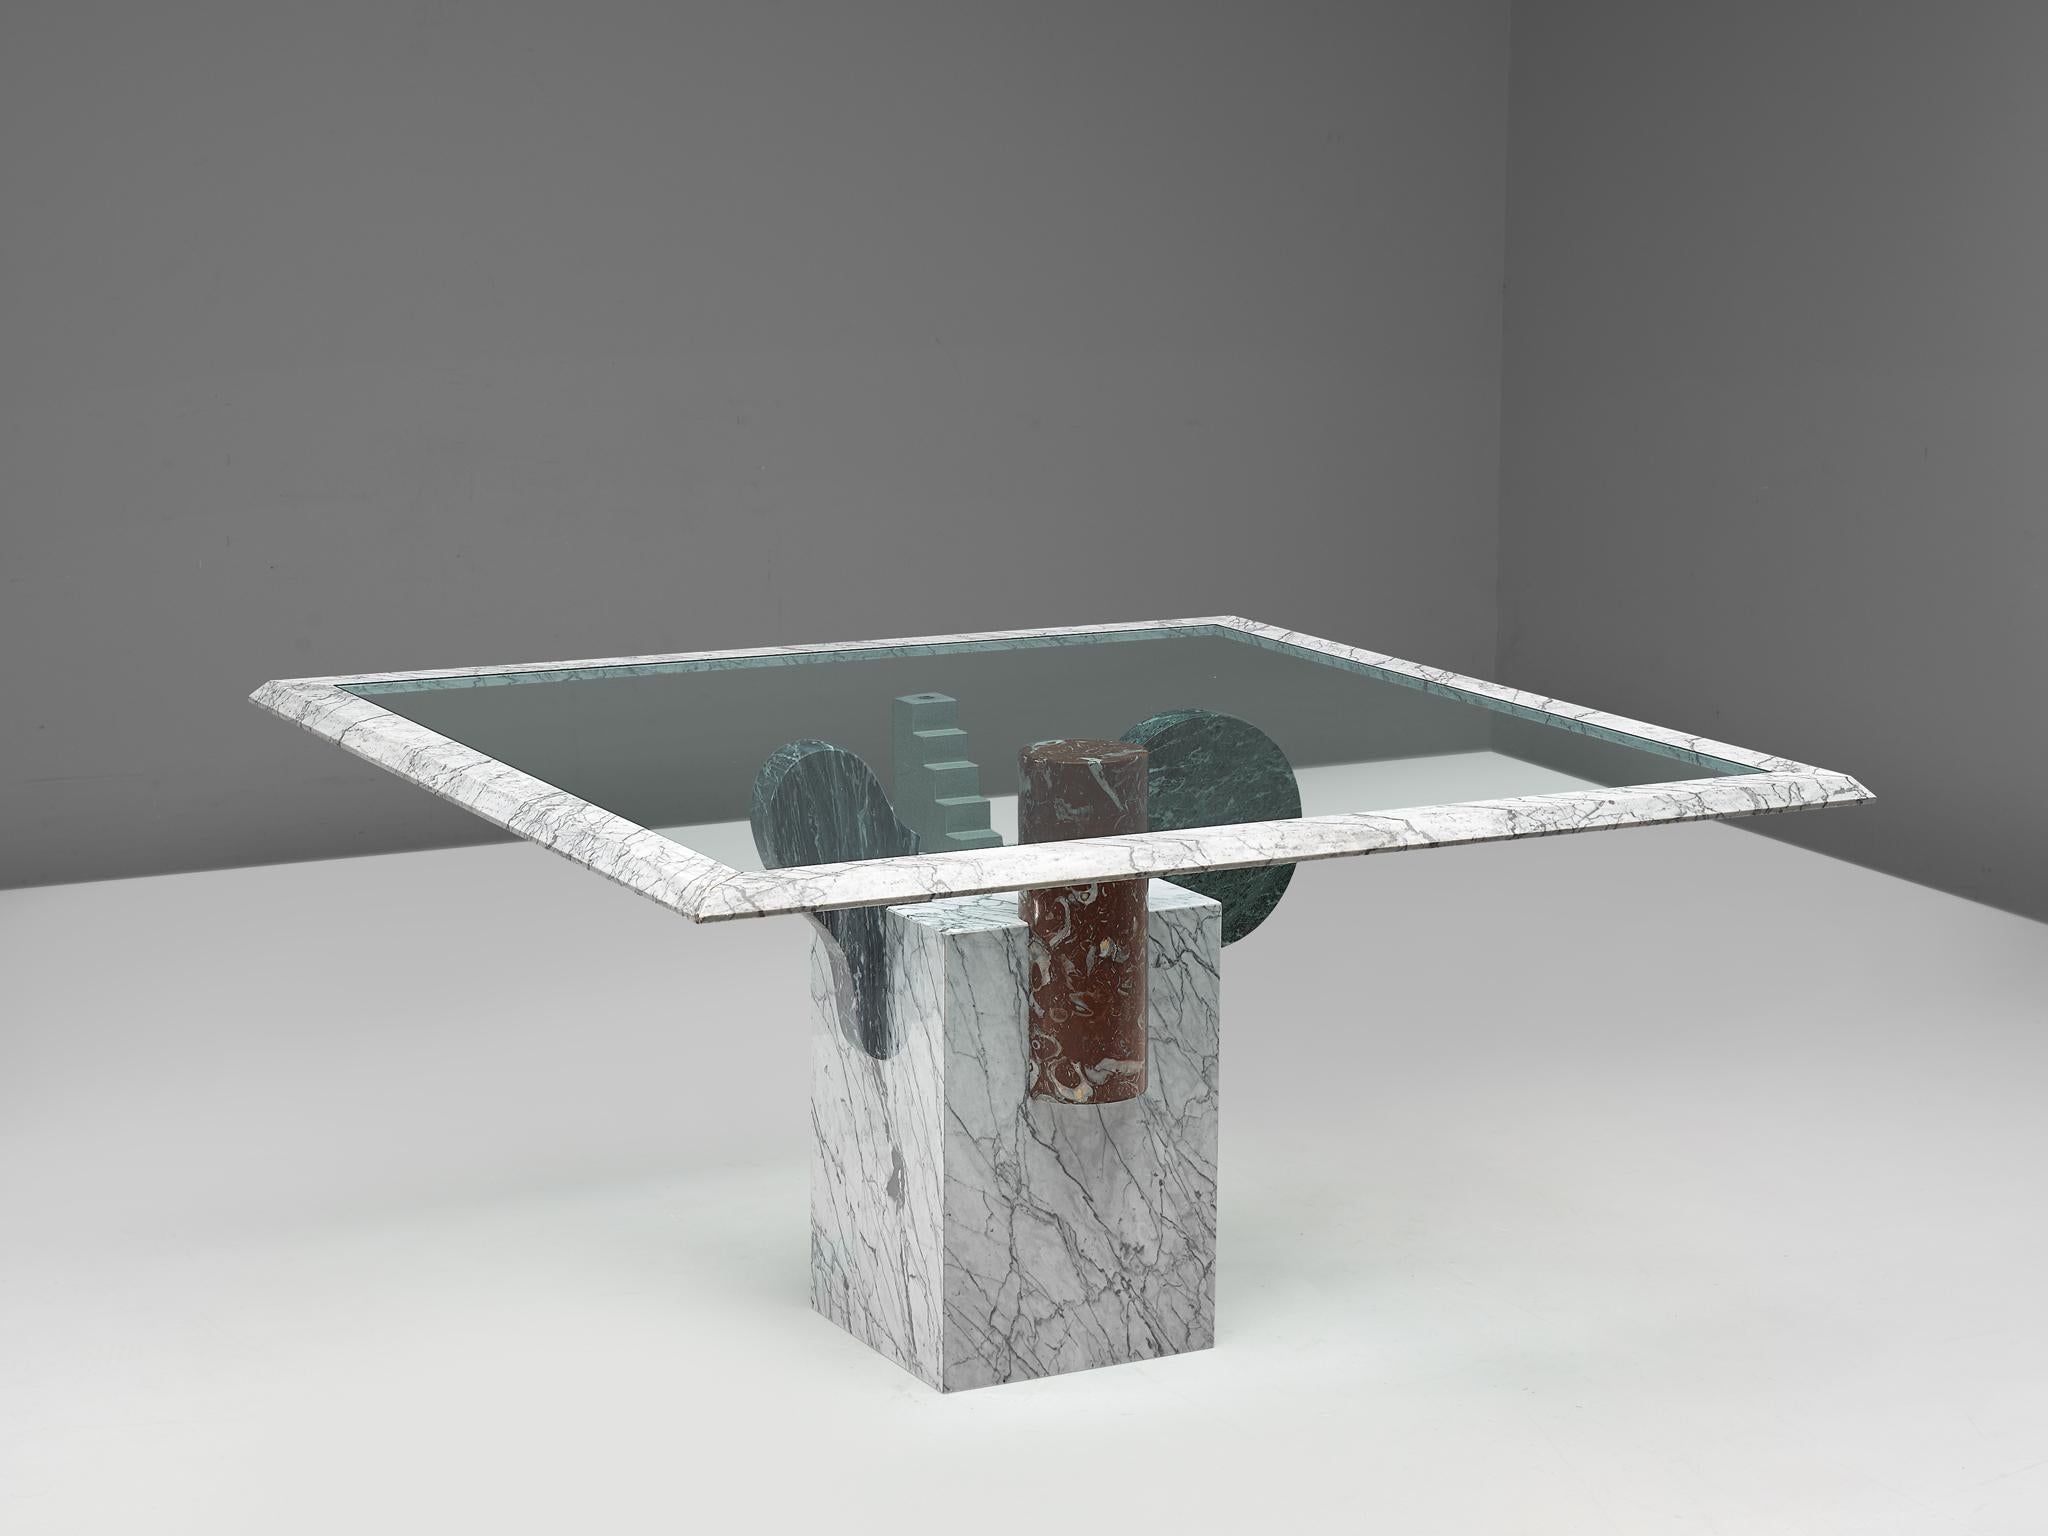 Pier Alessandro Giusti and Egidio Di Rosa for UP&UP, dining table, marble, granite and glass, Italy, 1970s.

Postmodern Italian dining table with glass top and marble foot designed by the duo Pier Alessandro Giusti and Egidio Di Rosa for UP&UP. The